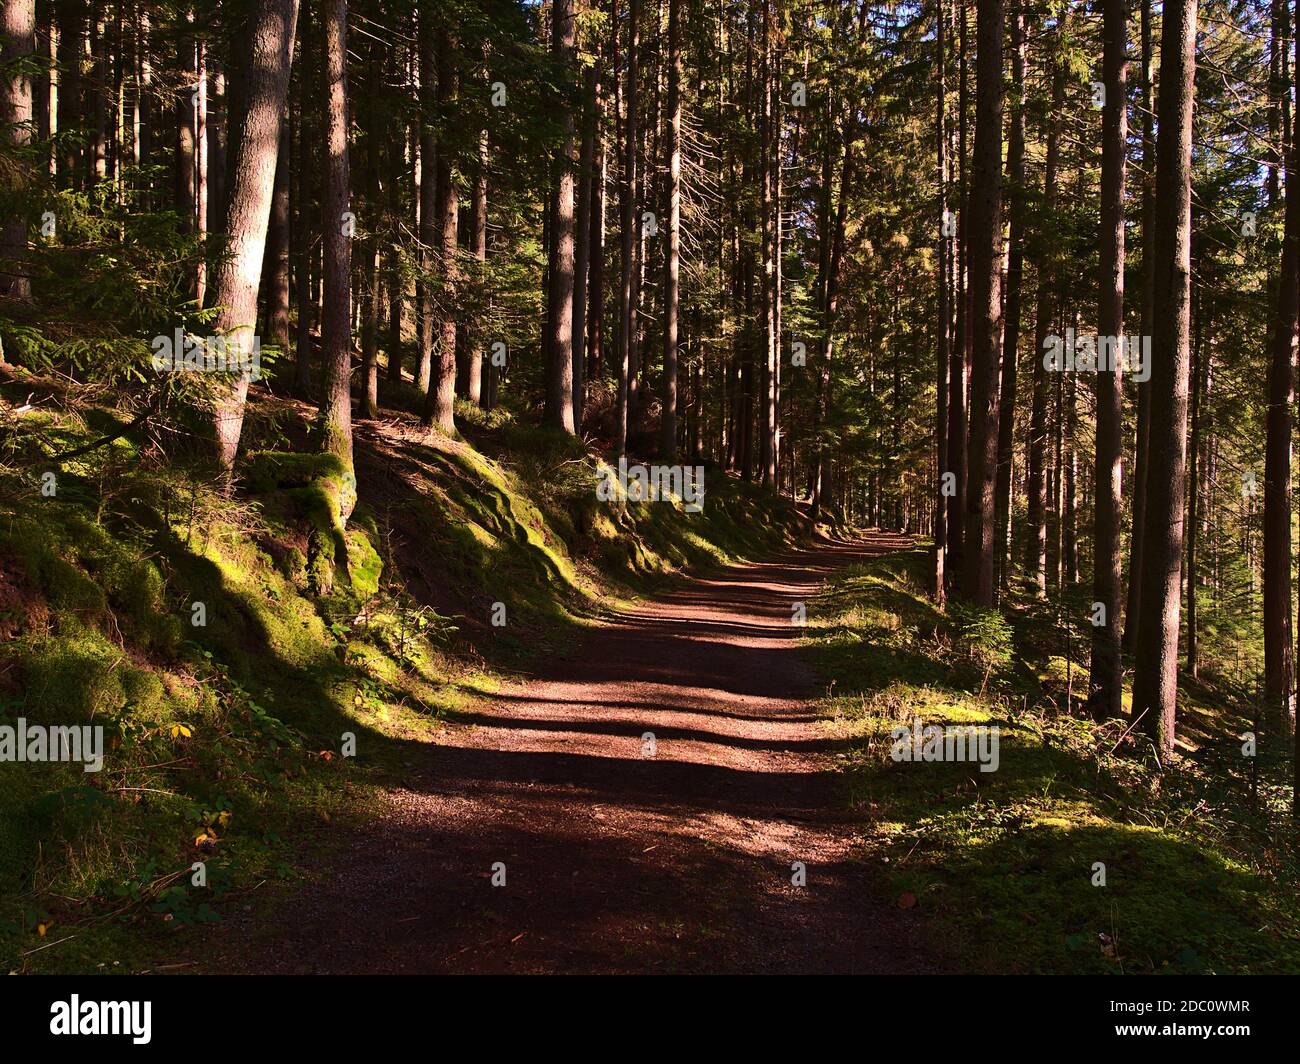 Idyllic path leading through a dense forest with coniferous spruce trees with an alternation of shadows and sunlight between the tree trunks. Stock Photo